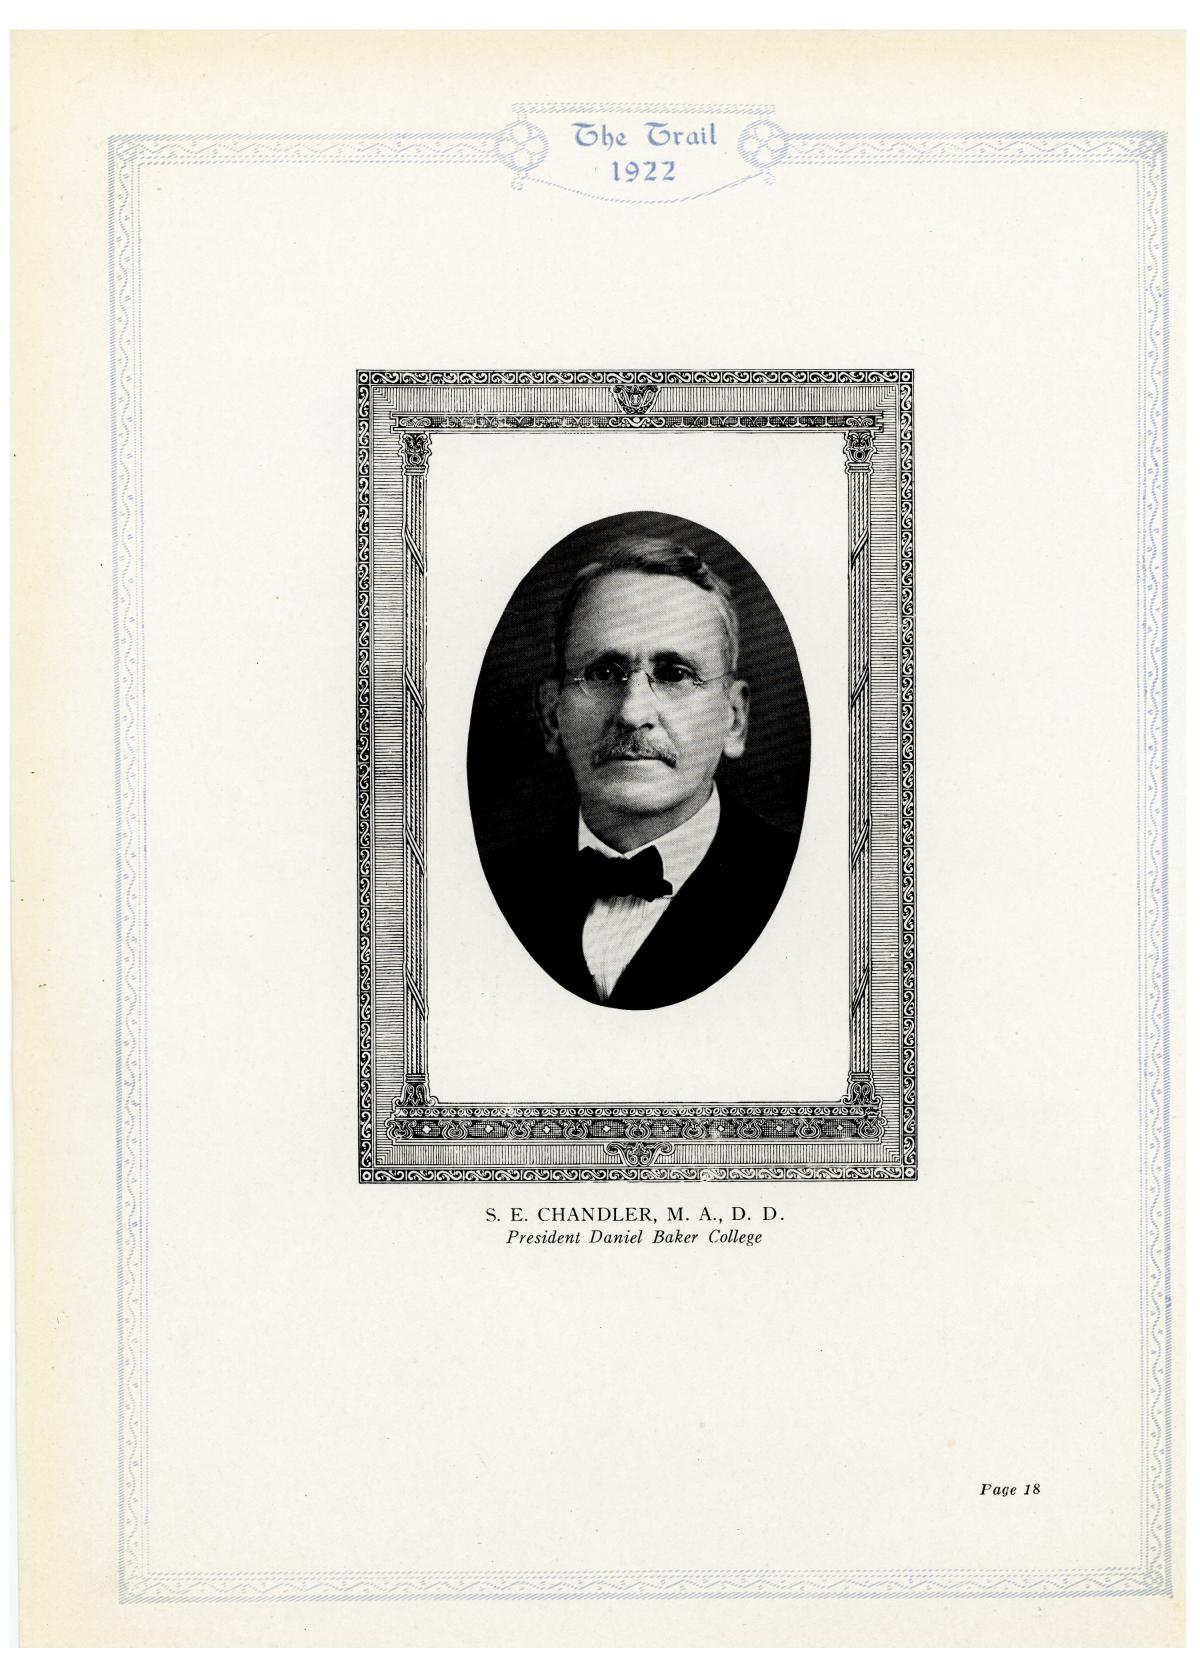 The Trail, Yearbook of Daniel Baker College, 1922
                                                
                                                    18
                                                